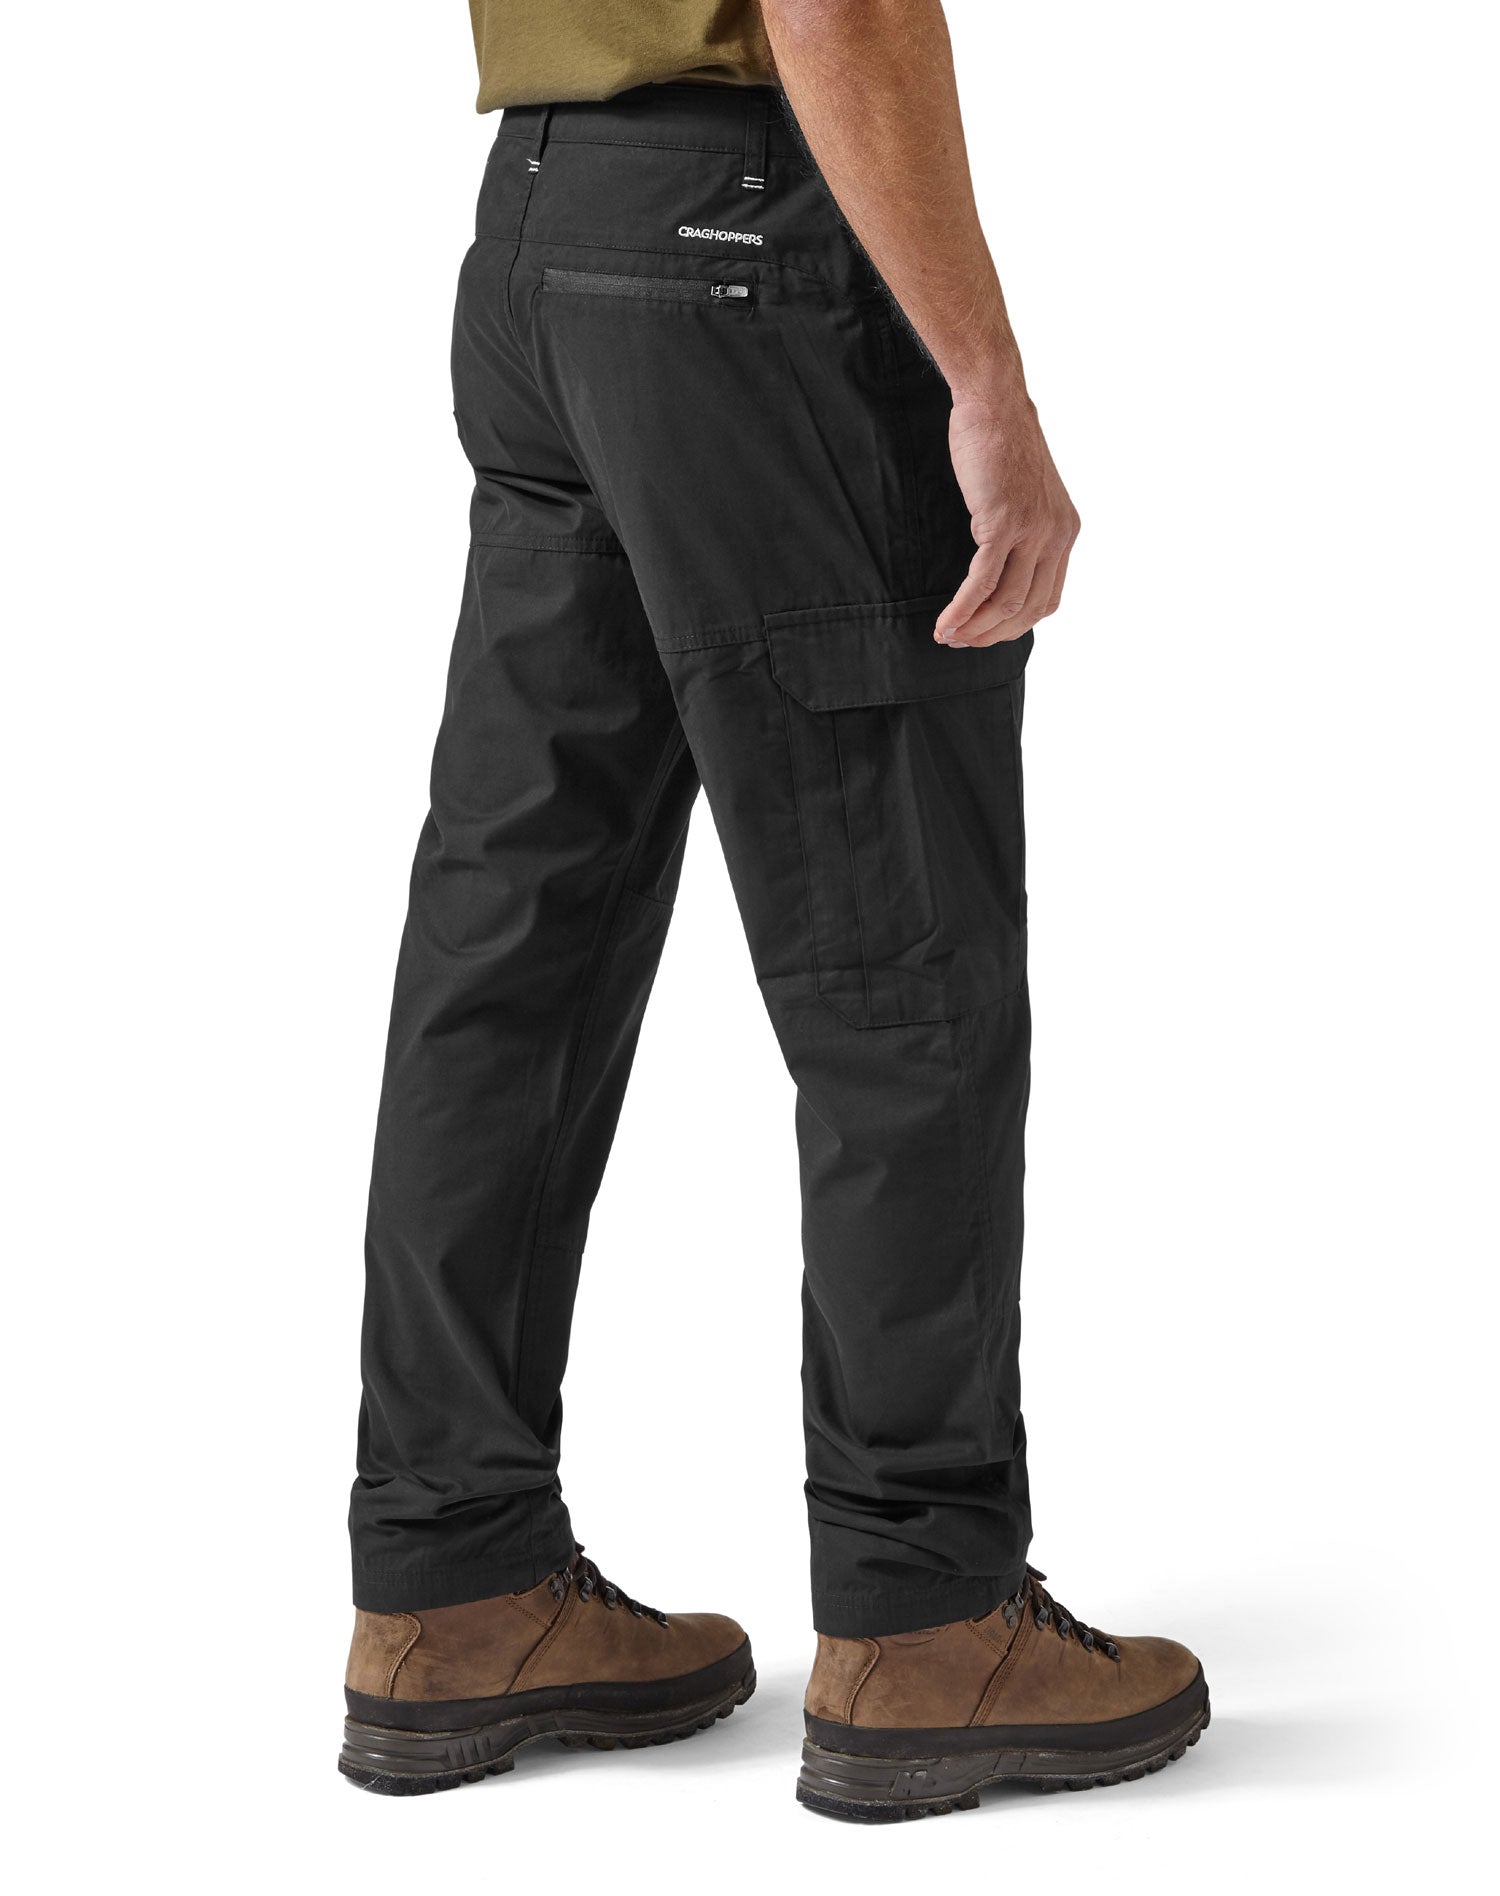 rear side view Craghoppers Traverse Trousers